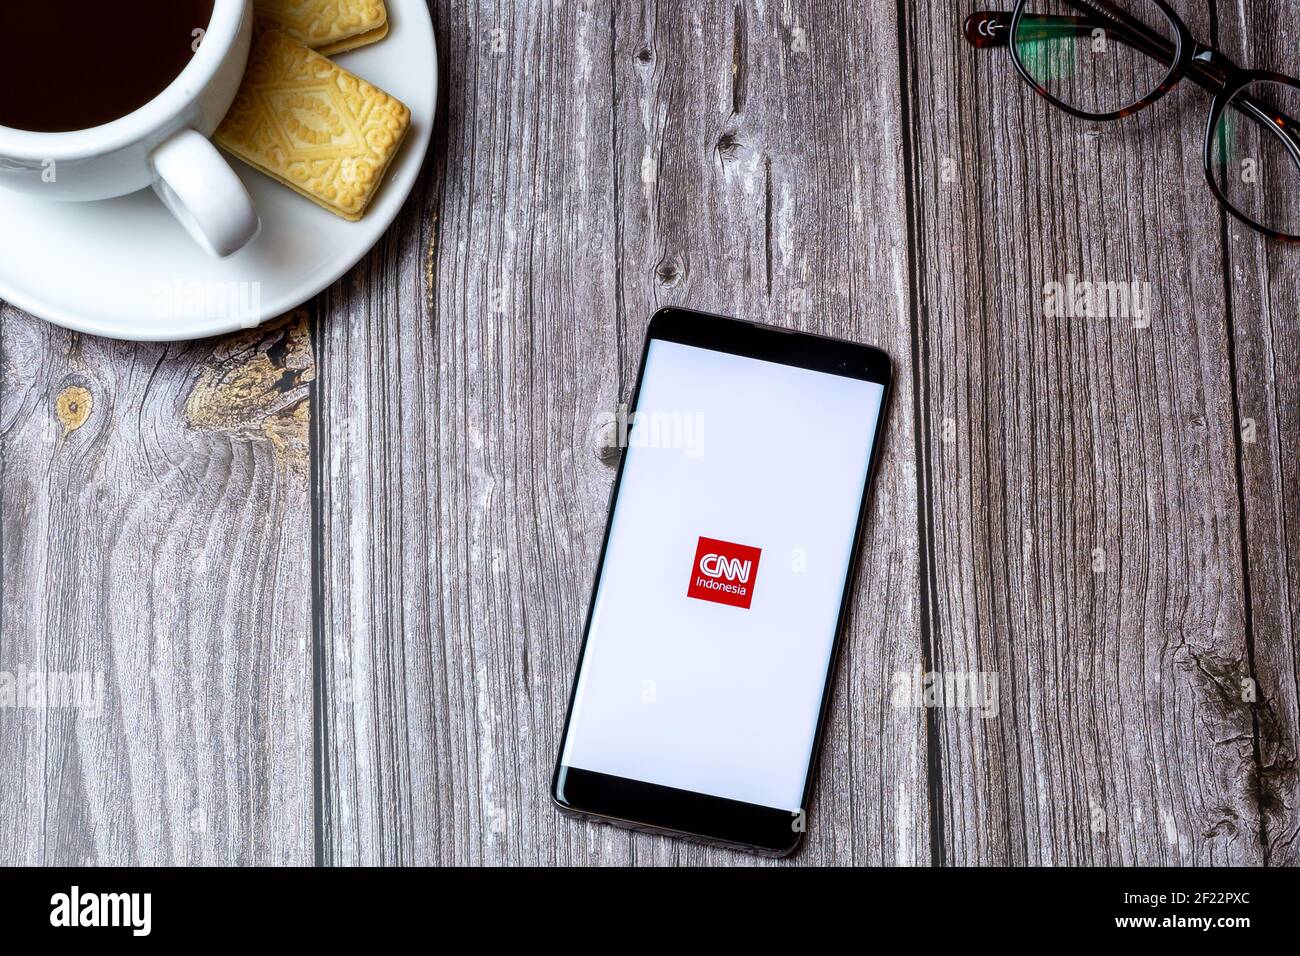 A mobile phone or cell phone on a wooden table with the CNN Indonesia app open next to a coffee and glasses Stock Photo